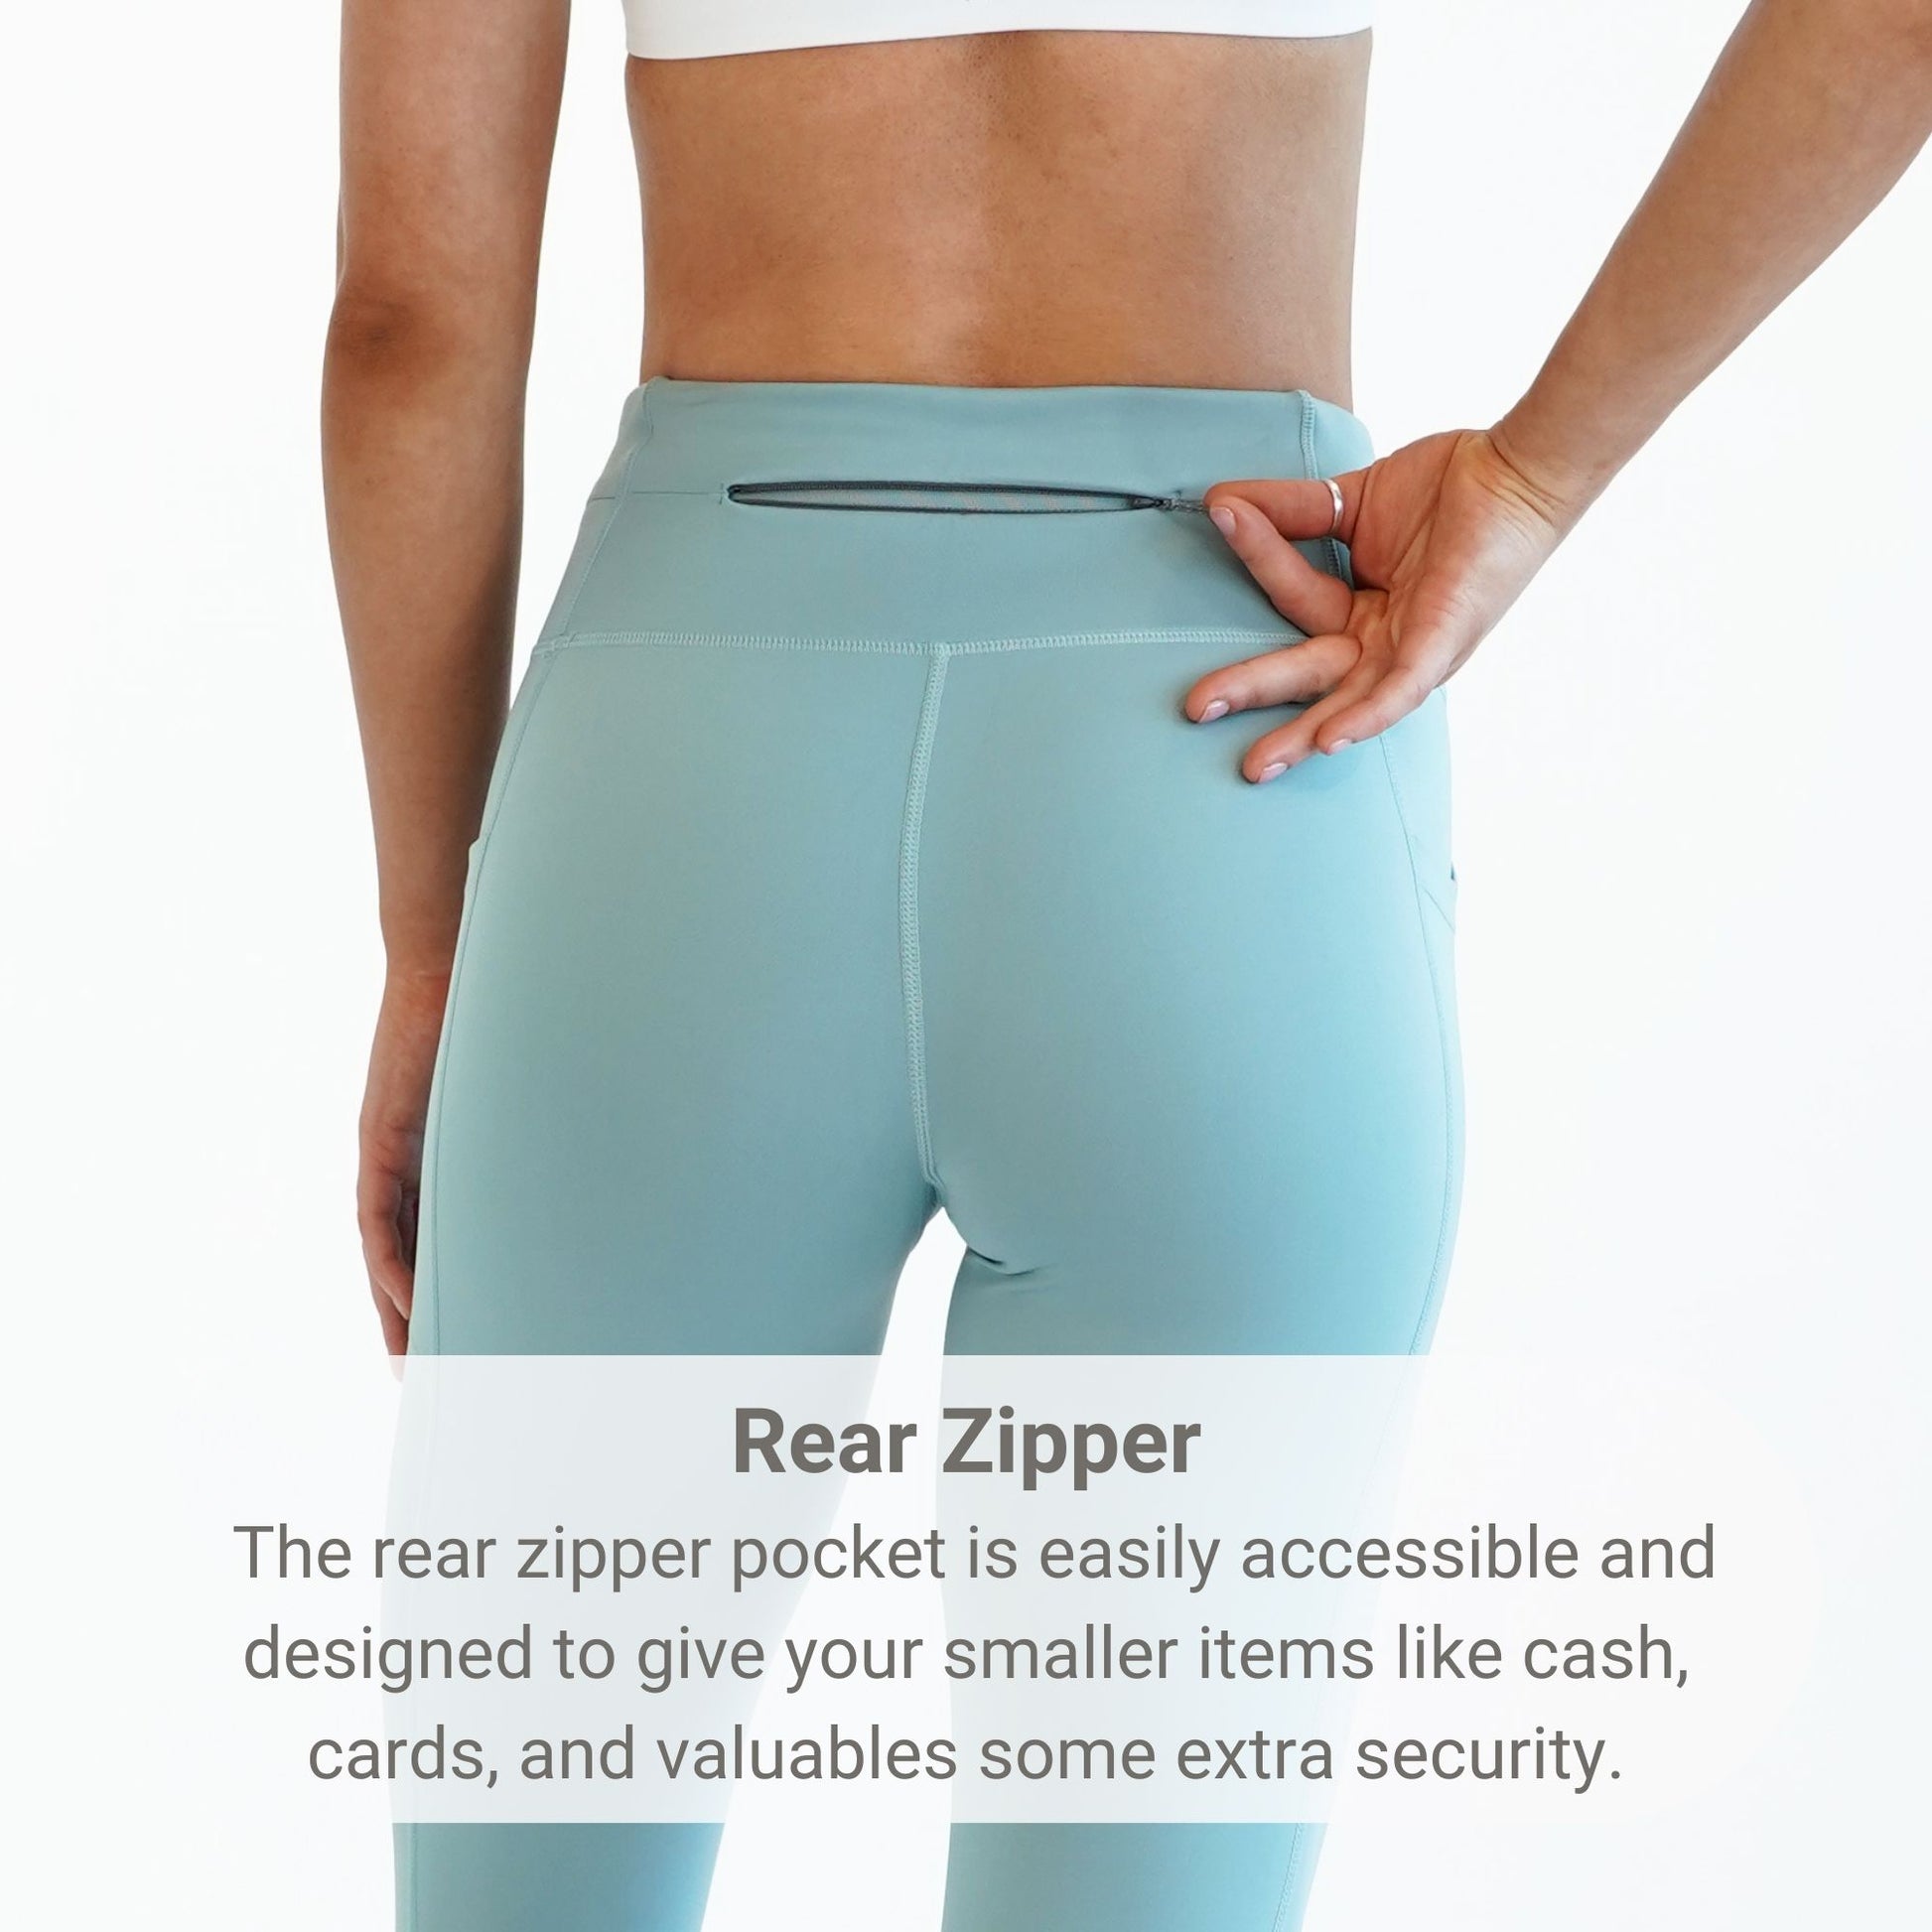 Women's Workout Leggings with Pockets